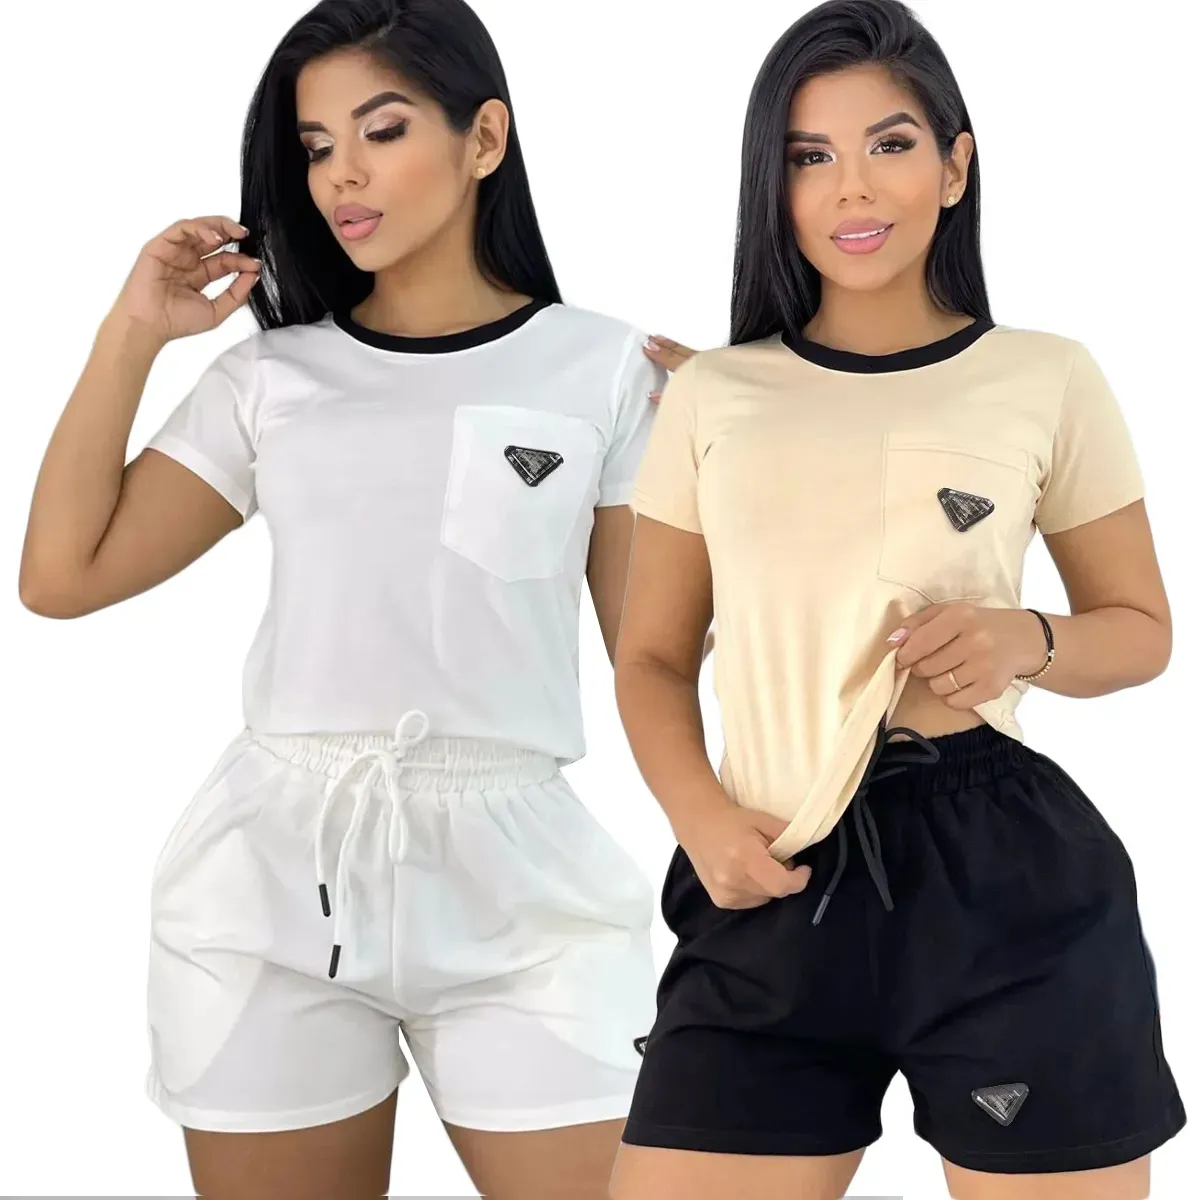 Women's tracksuit casual jogging pants wear designer short sleeves and shorts set for women's freedom boat